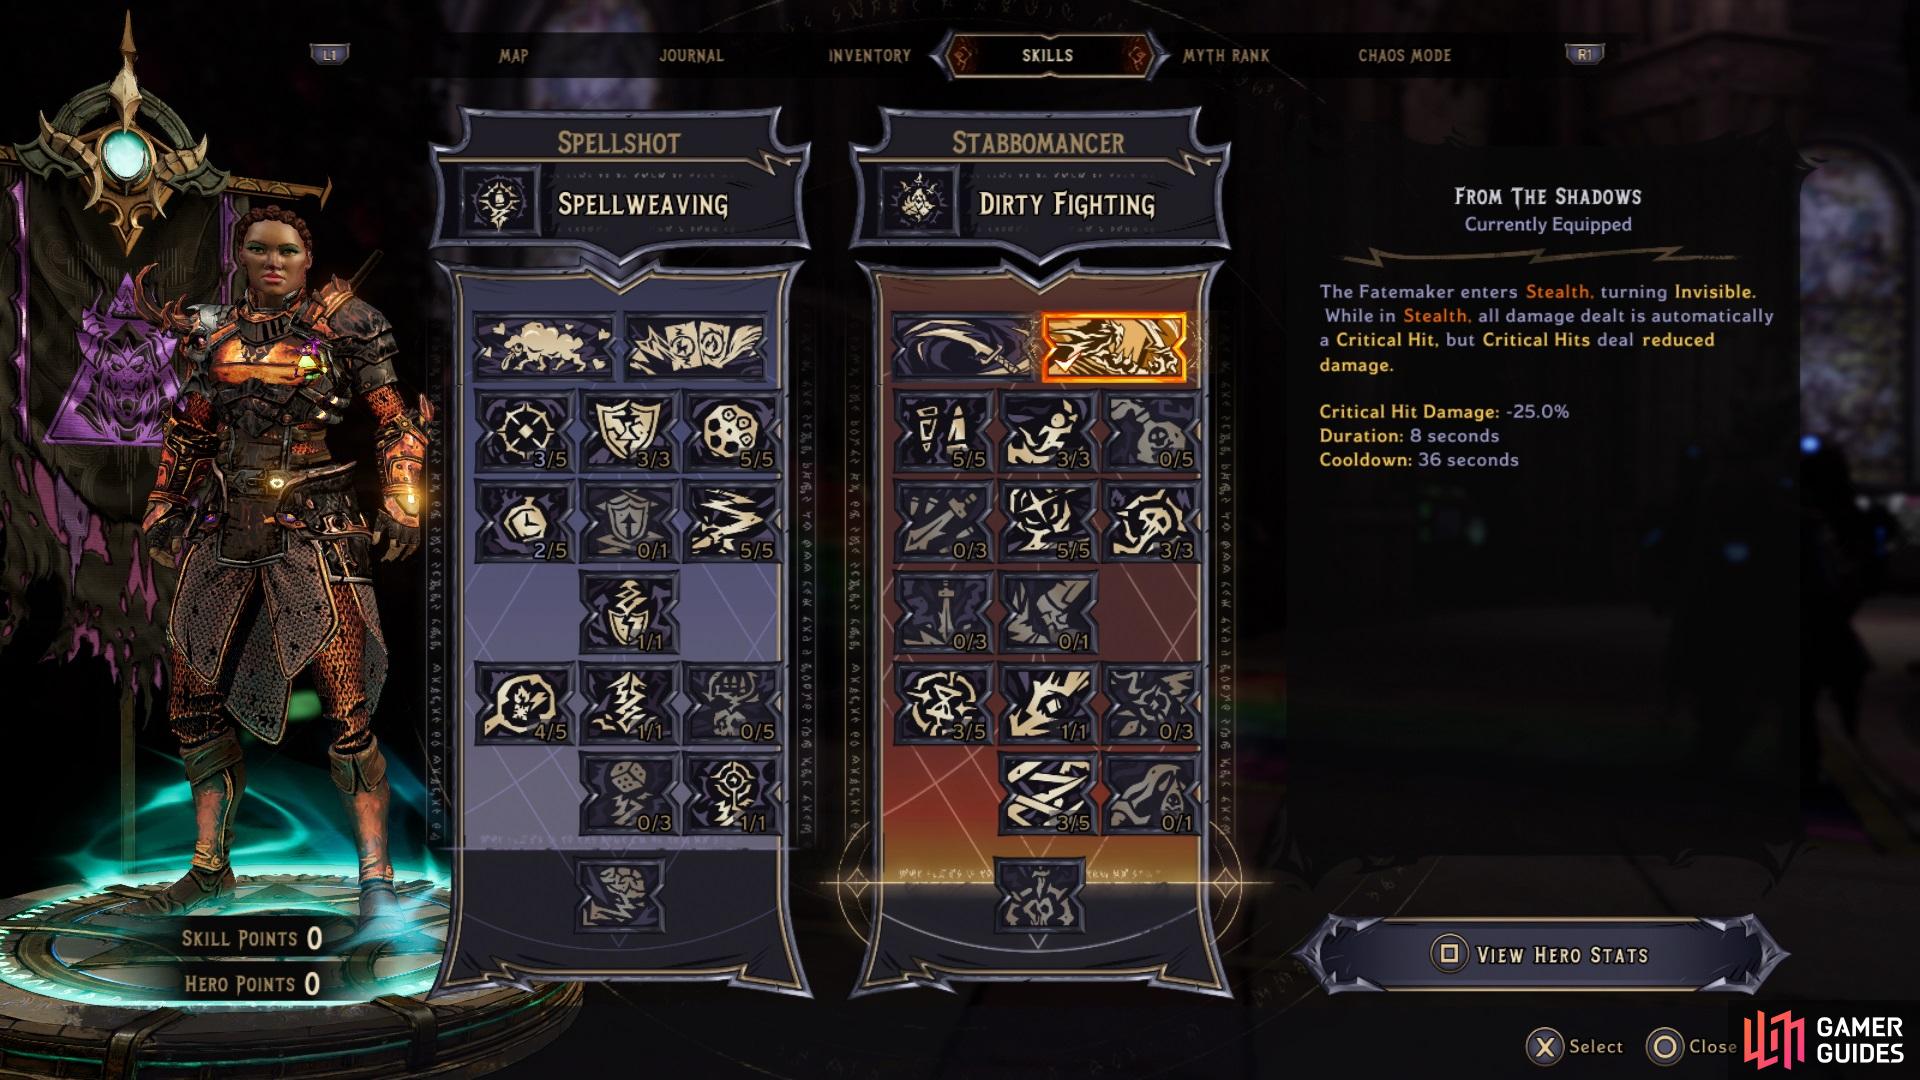 The Skill Trees for this build